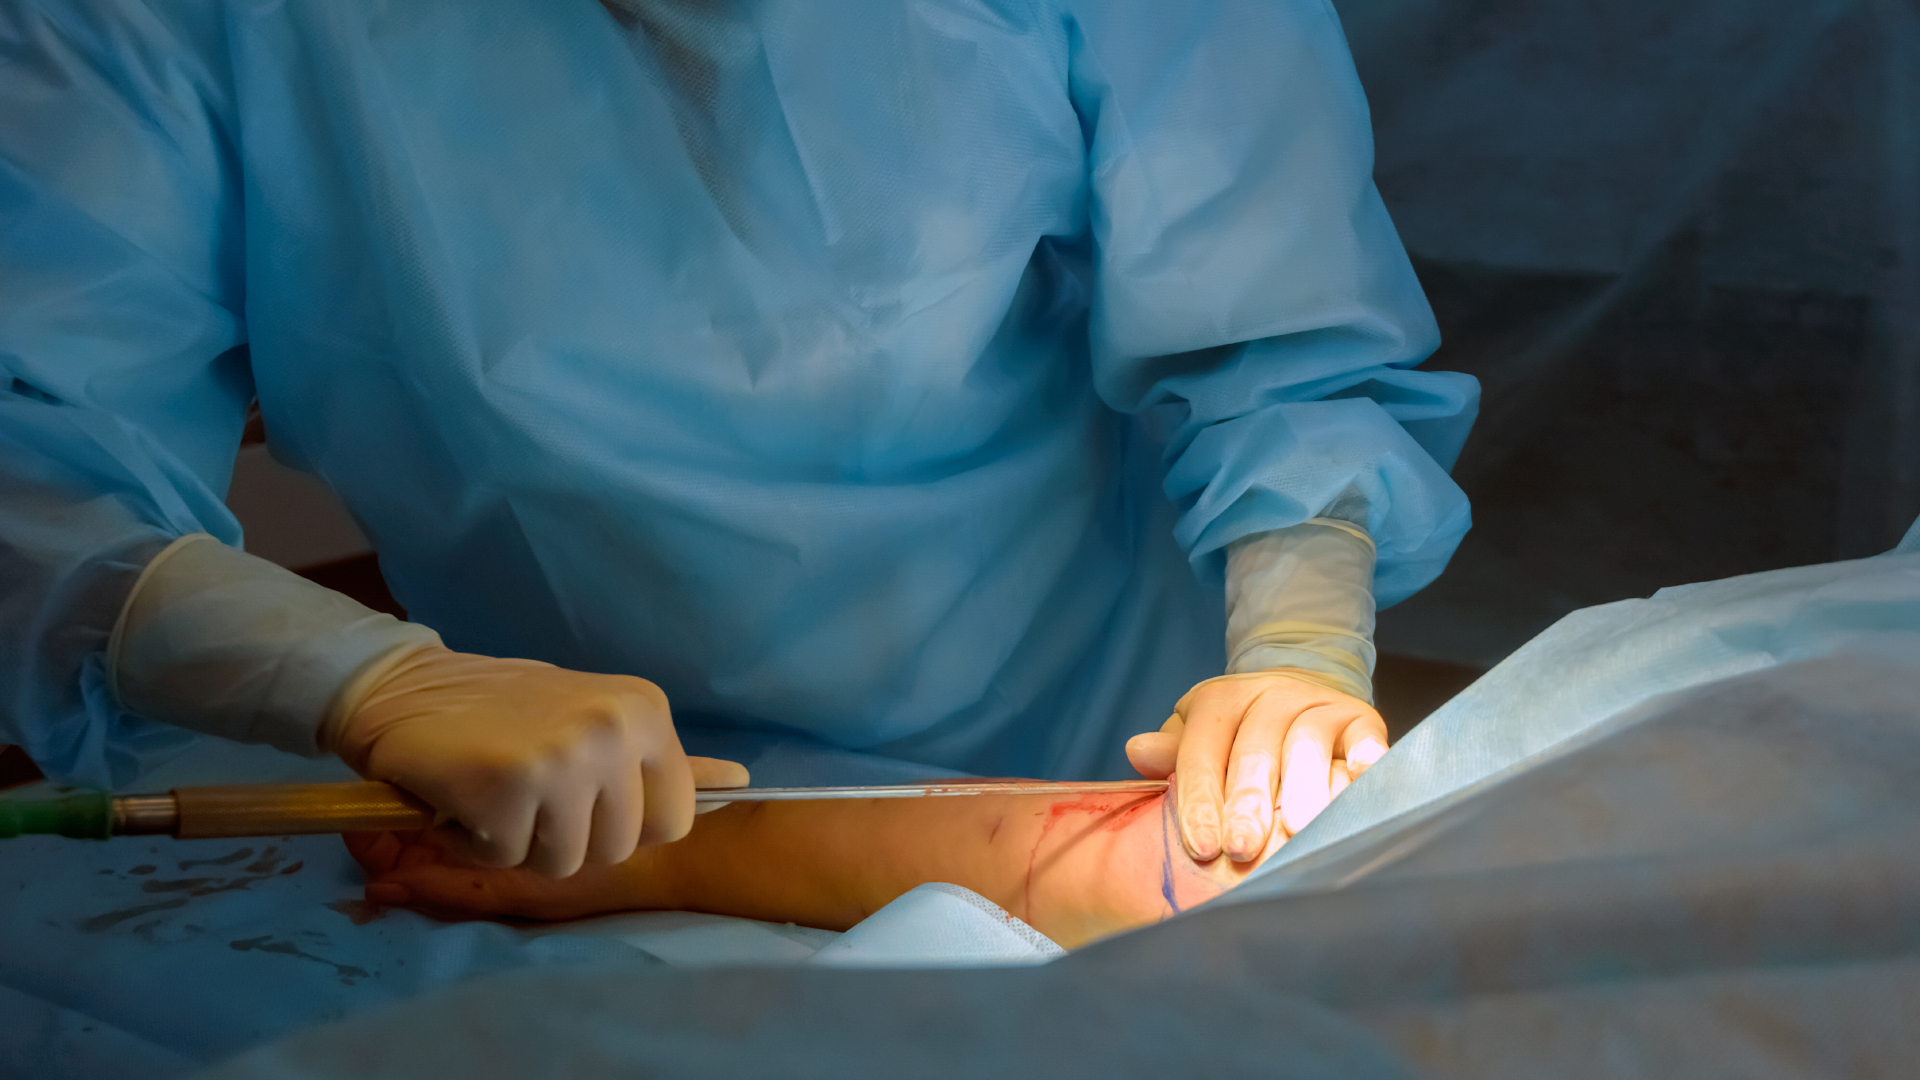 A plastic surgeon using a cannula to remove excess arm fat